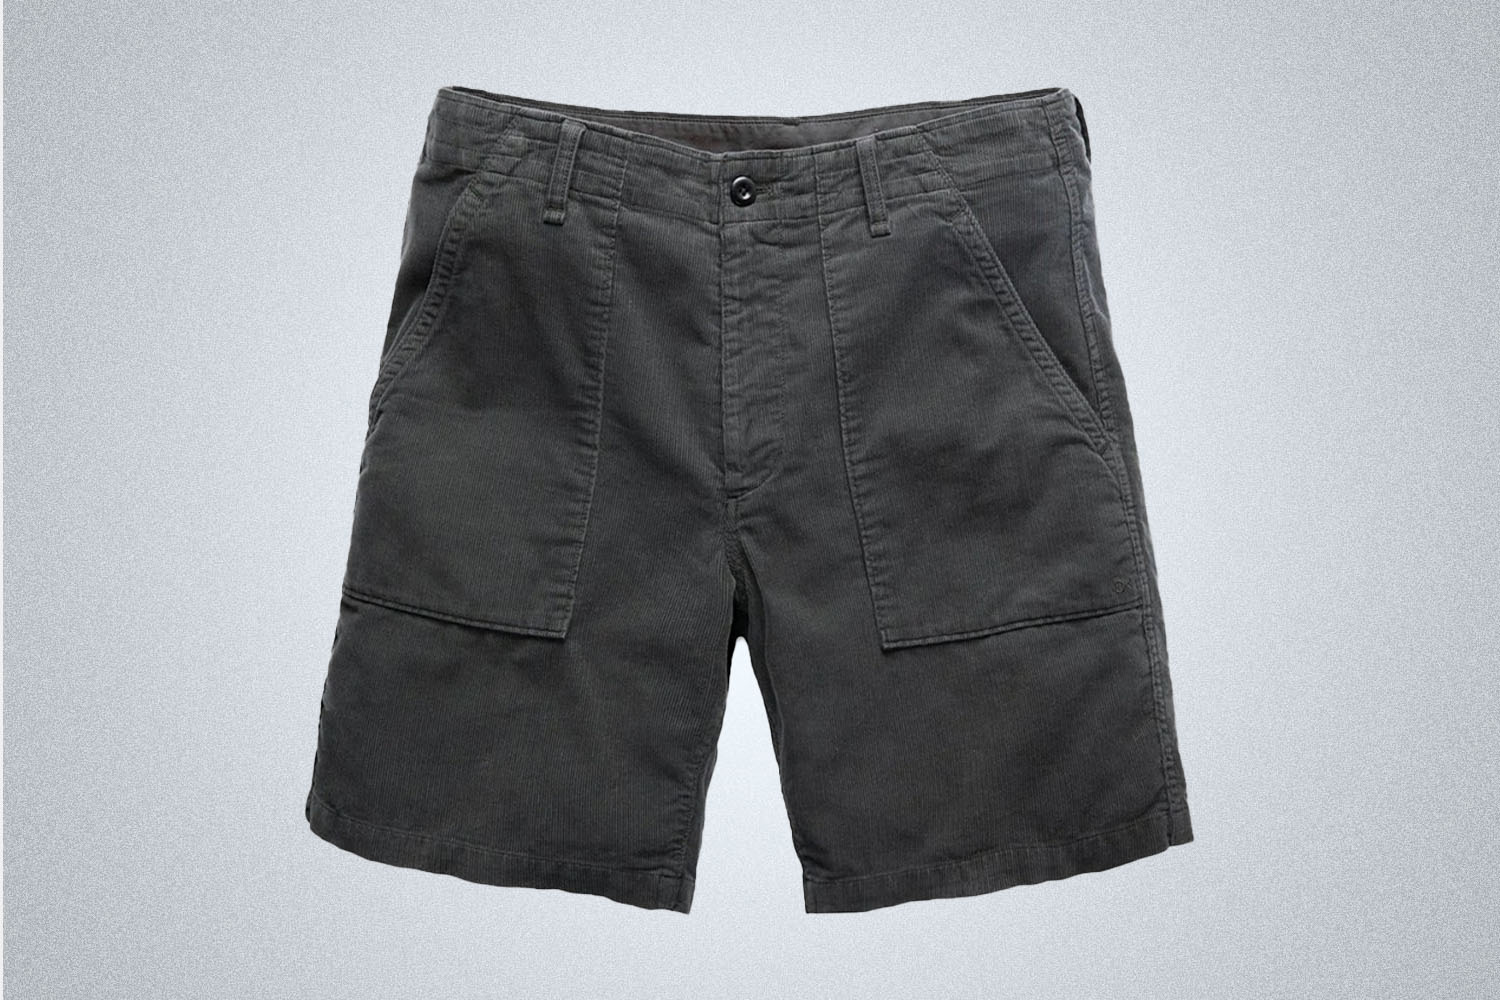 a black pair of corduroy shorts from Outerknown on a grey background